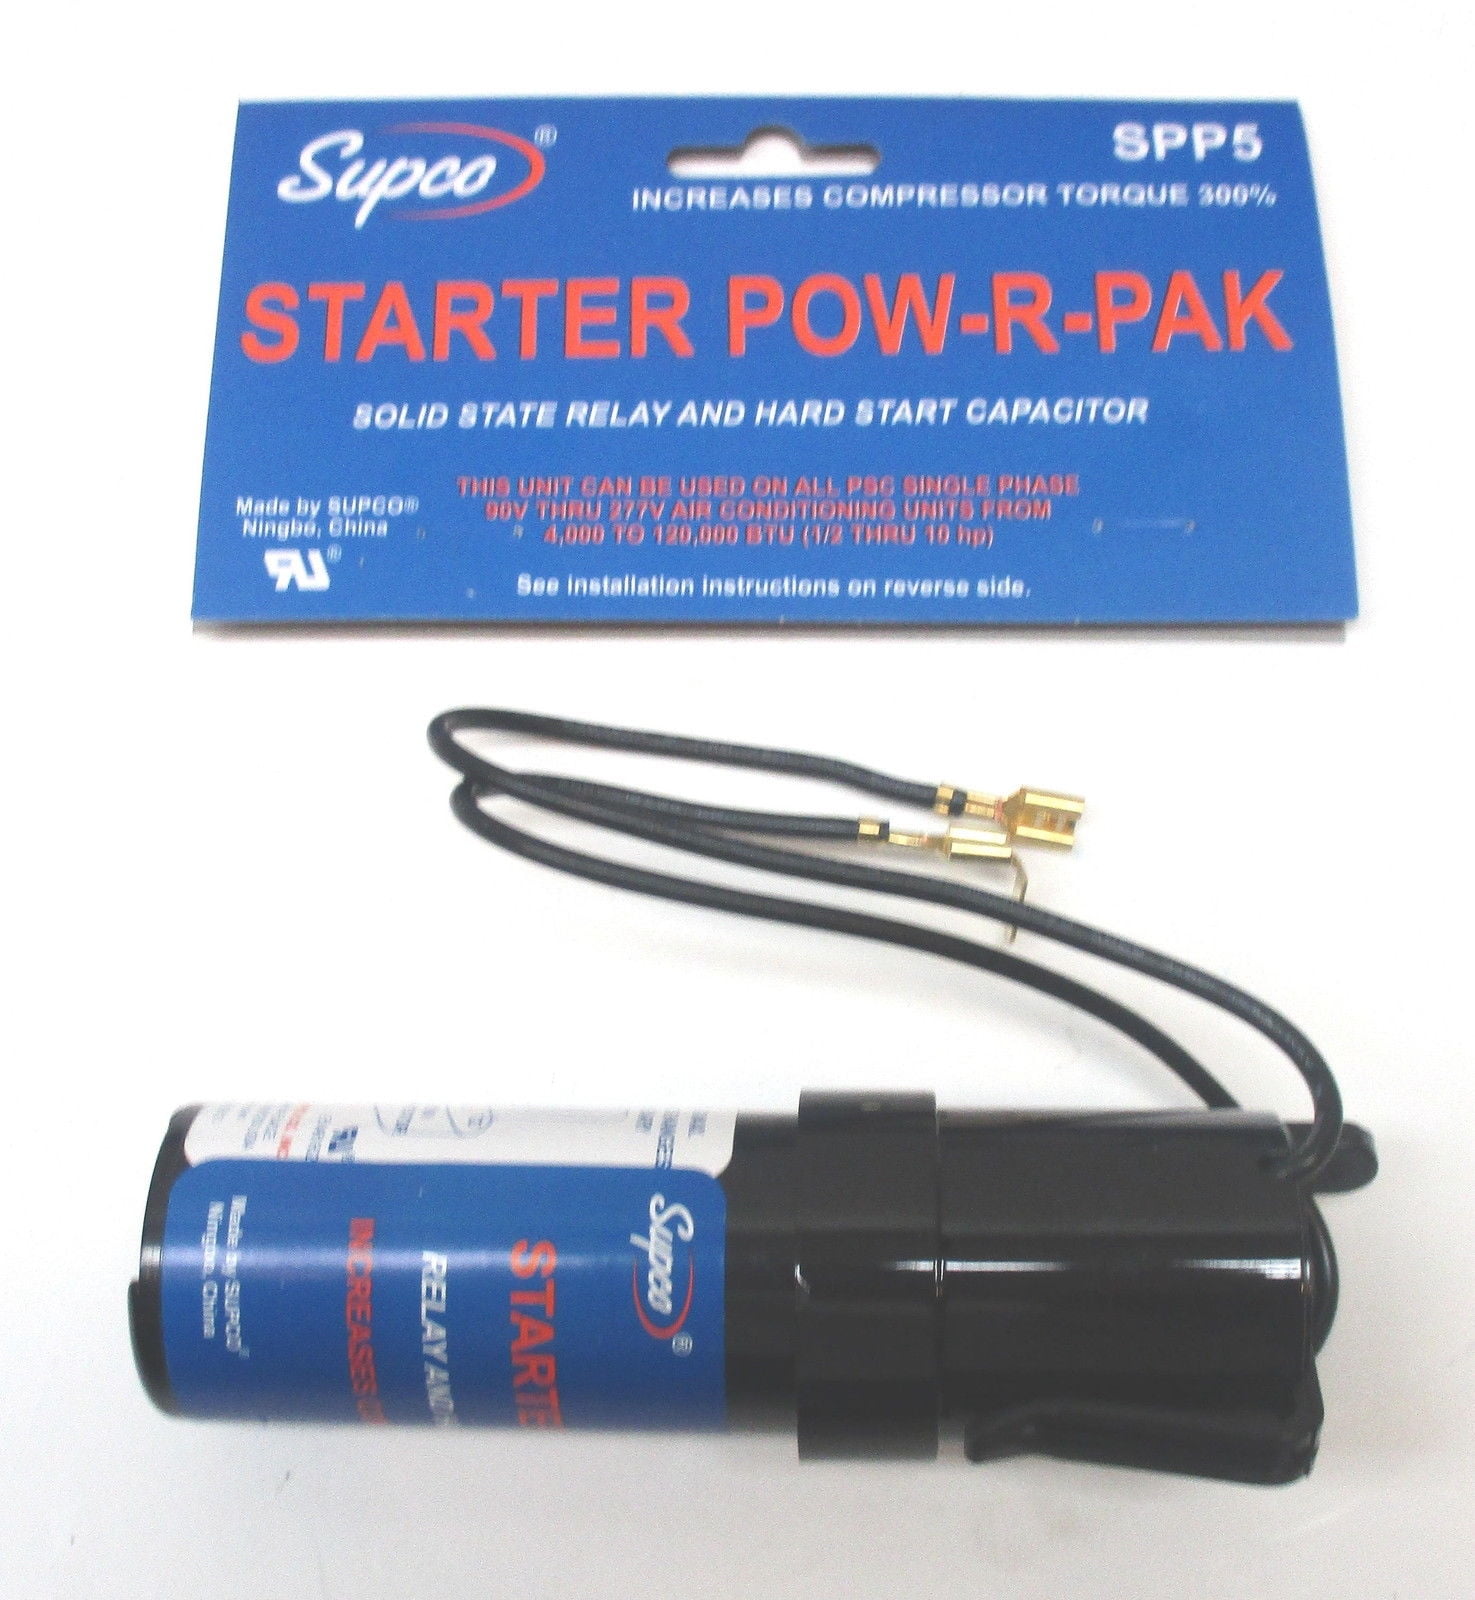 SUPCO Hs6 SPP6 Hard Start Relay Capacitor for sale online 